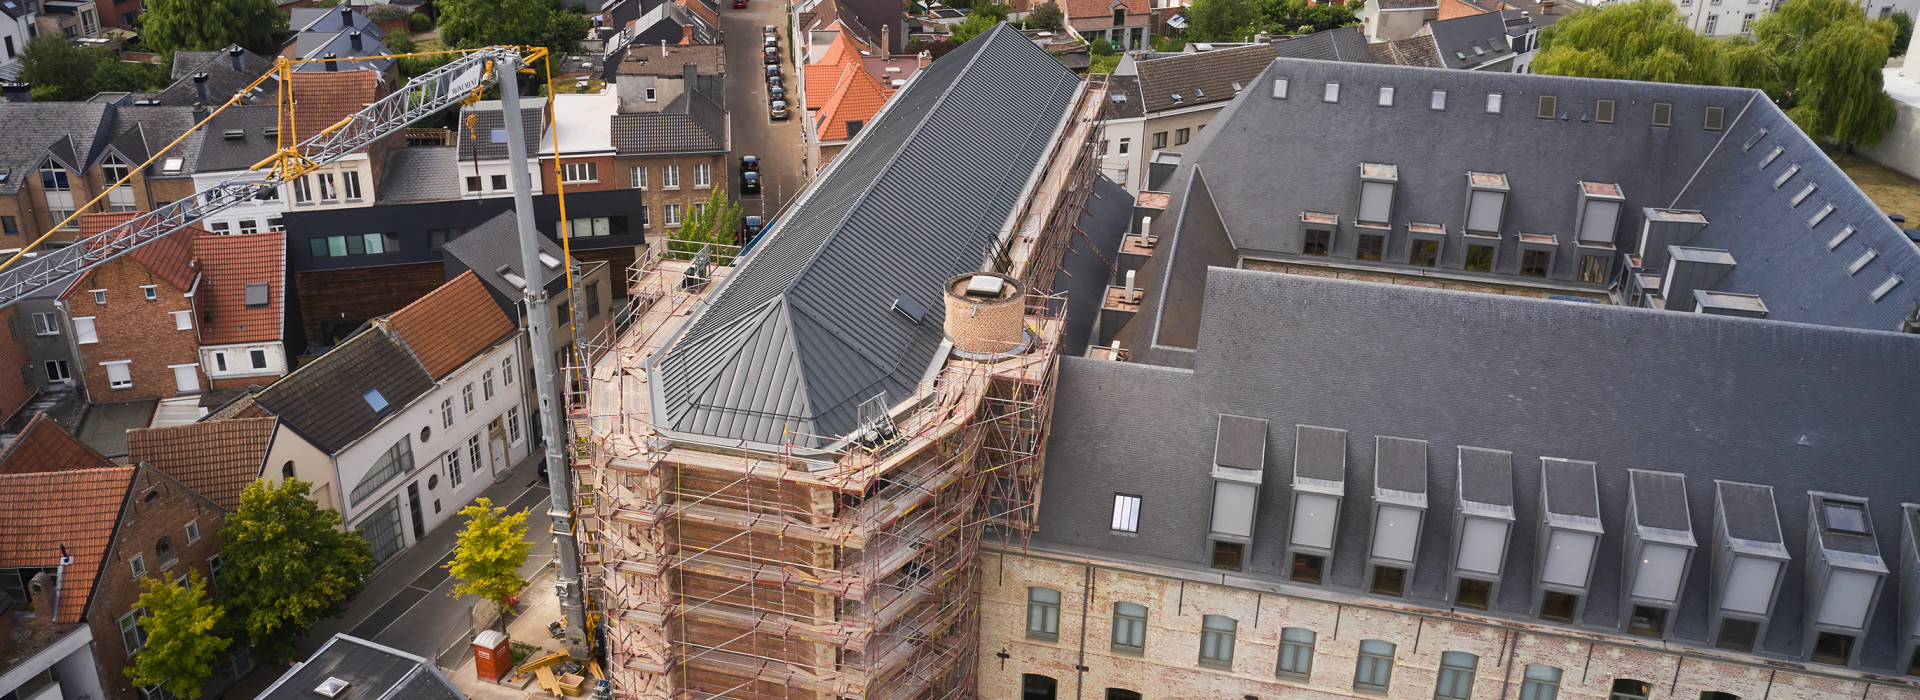 PV system for 400-year-old Dominican monastery in Mechelen, Belgium